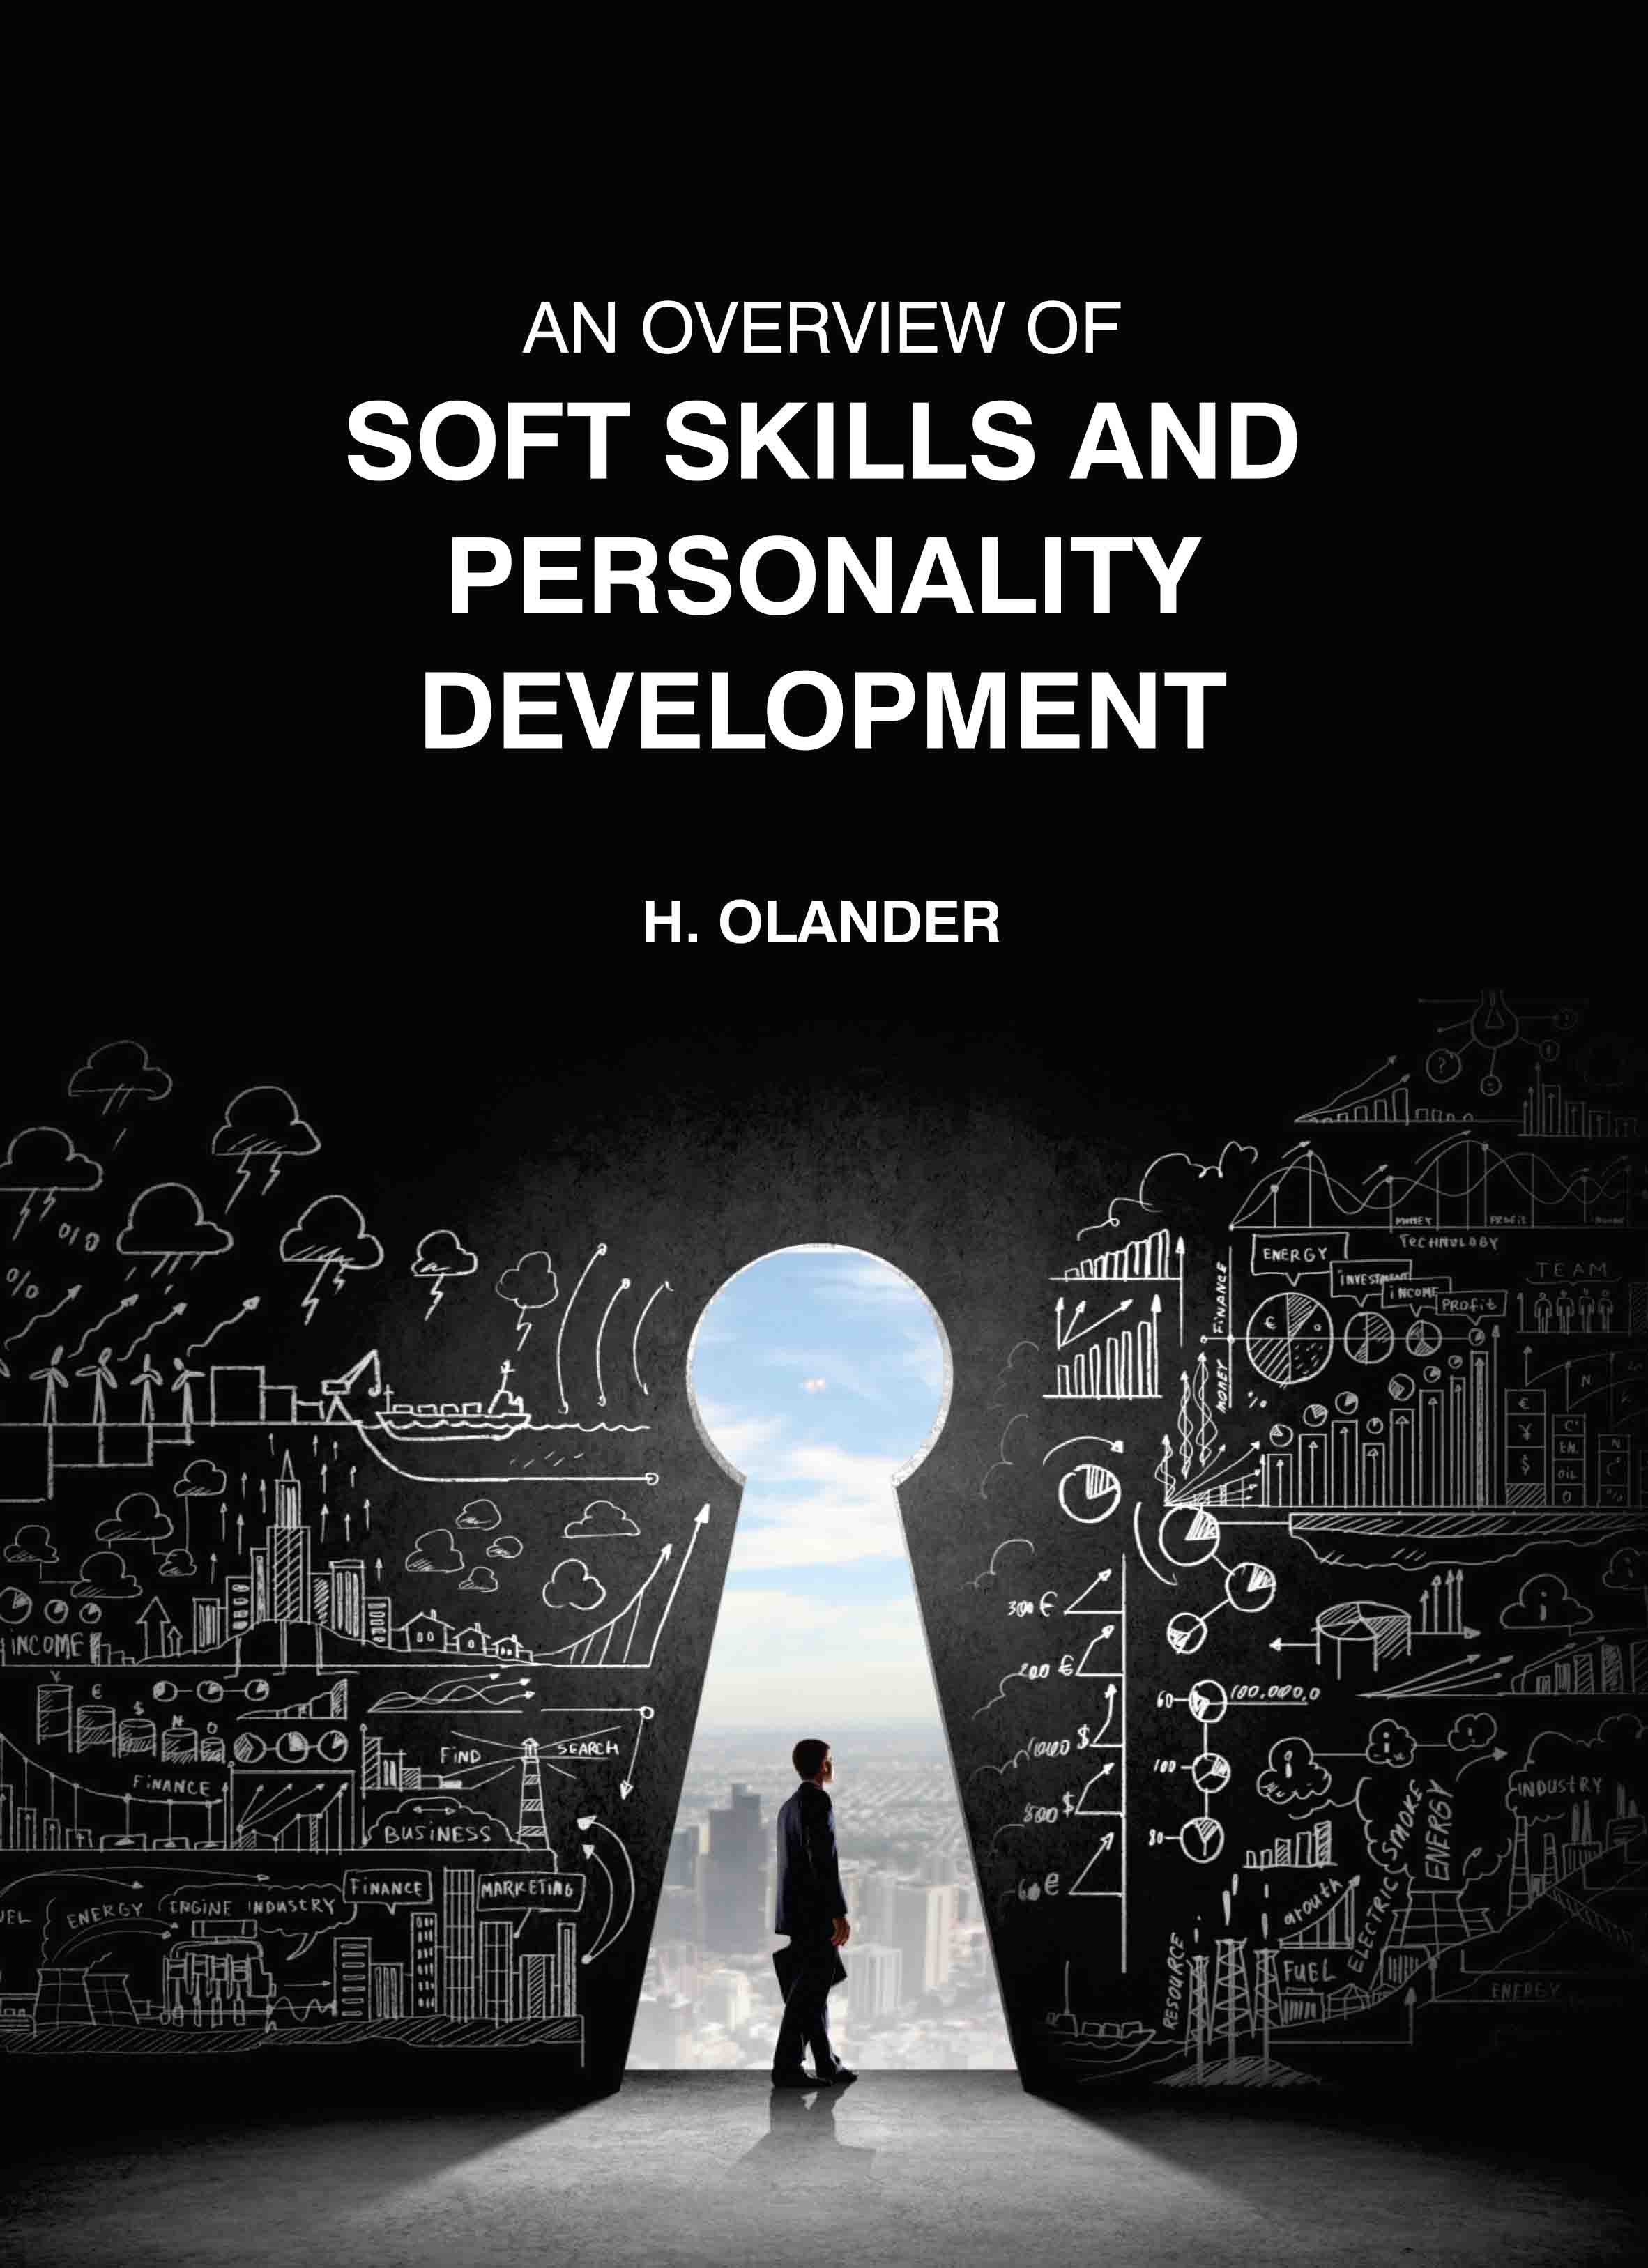 An Overview of Soft Skills and Personality Development